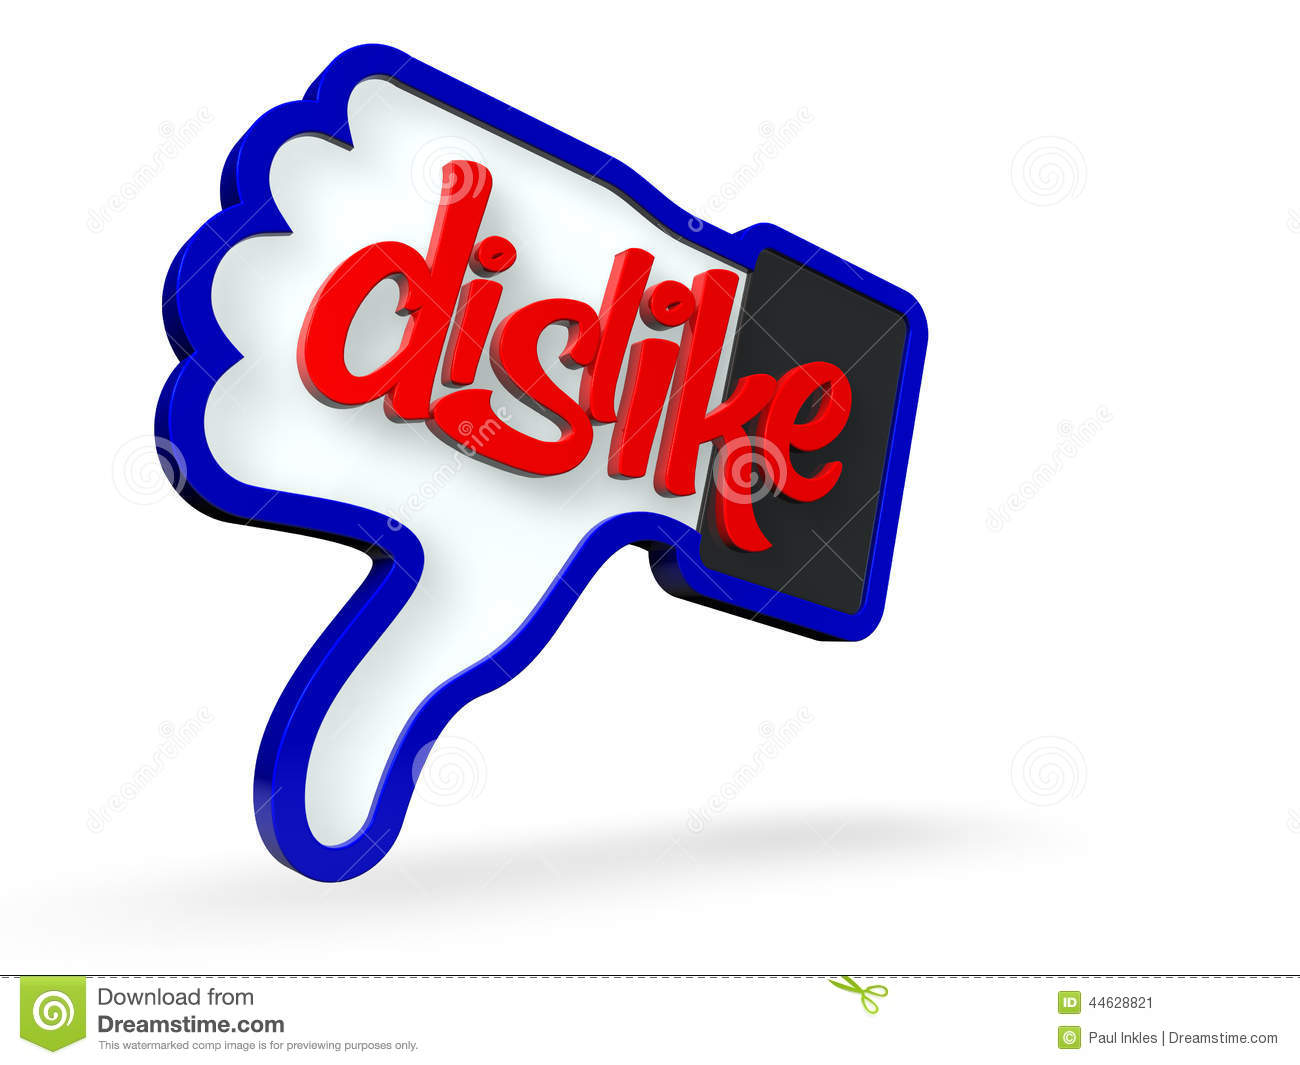     Of A Social Media Symbol With The Word  Dislike  Through The Middle